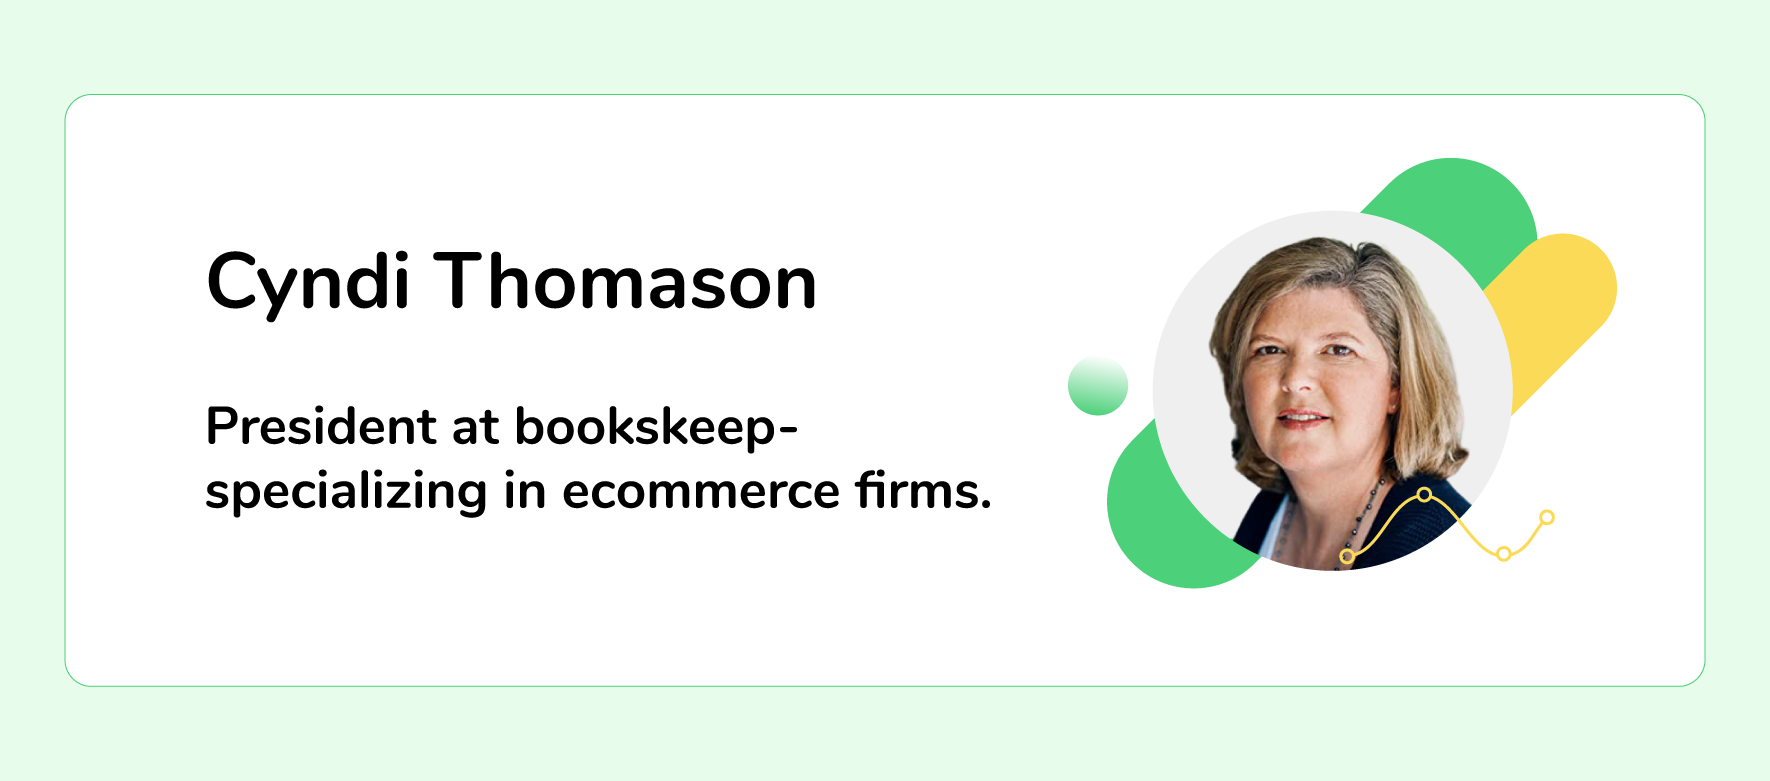 Cyndi Thomason, President at bookskeep - specializing in ecommerce firms